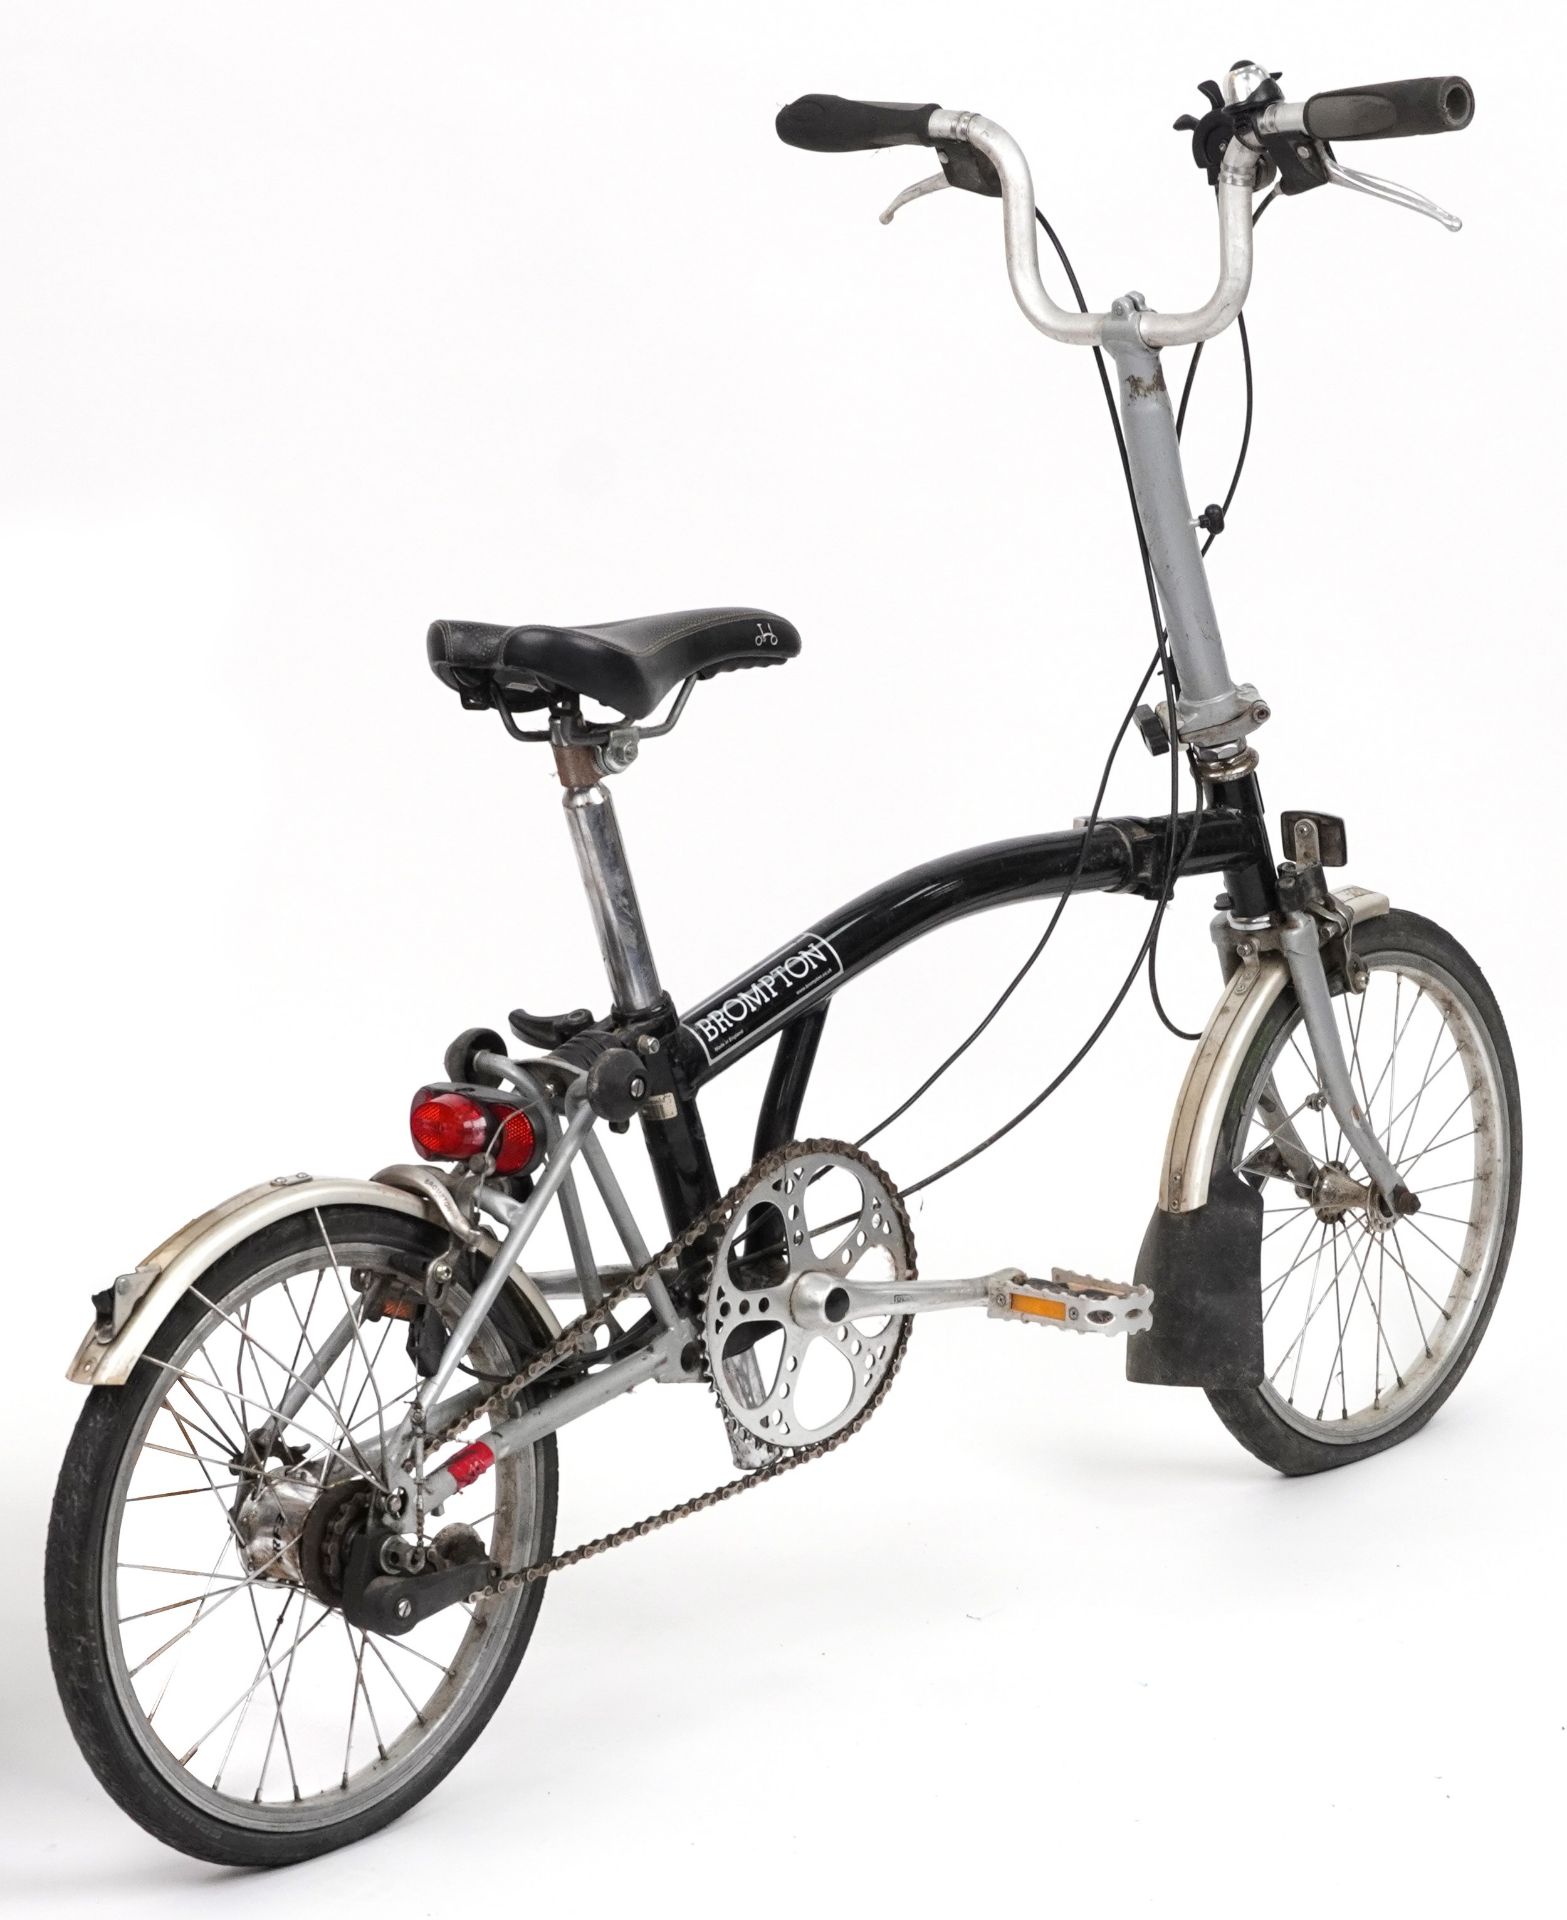 Folding Brompton bike, serial number 0805090669 : For further information on this lot please visit - Image 2 of 3